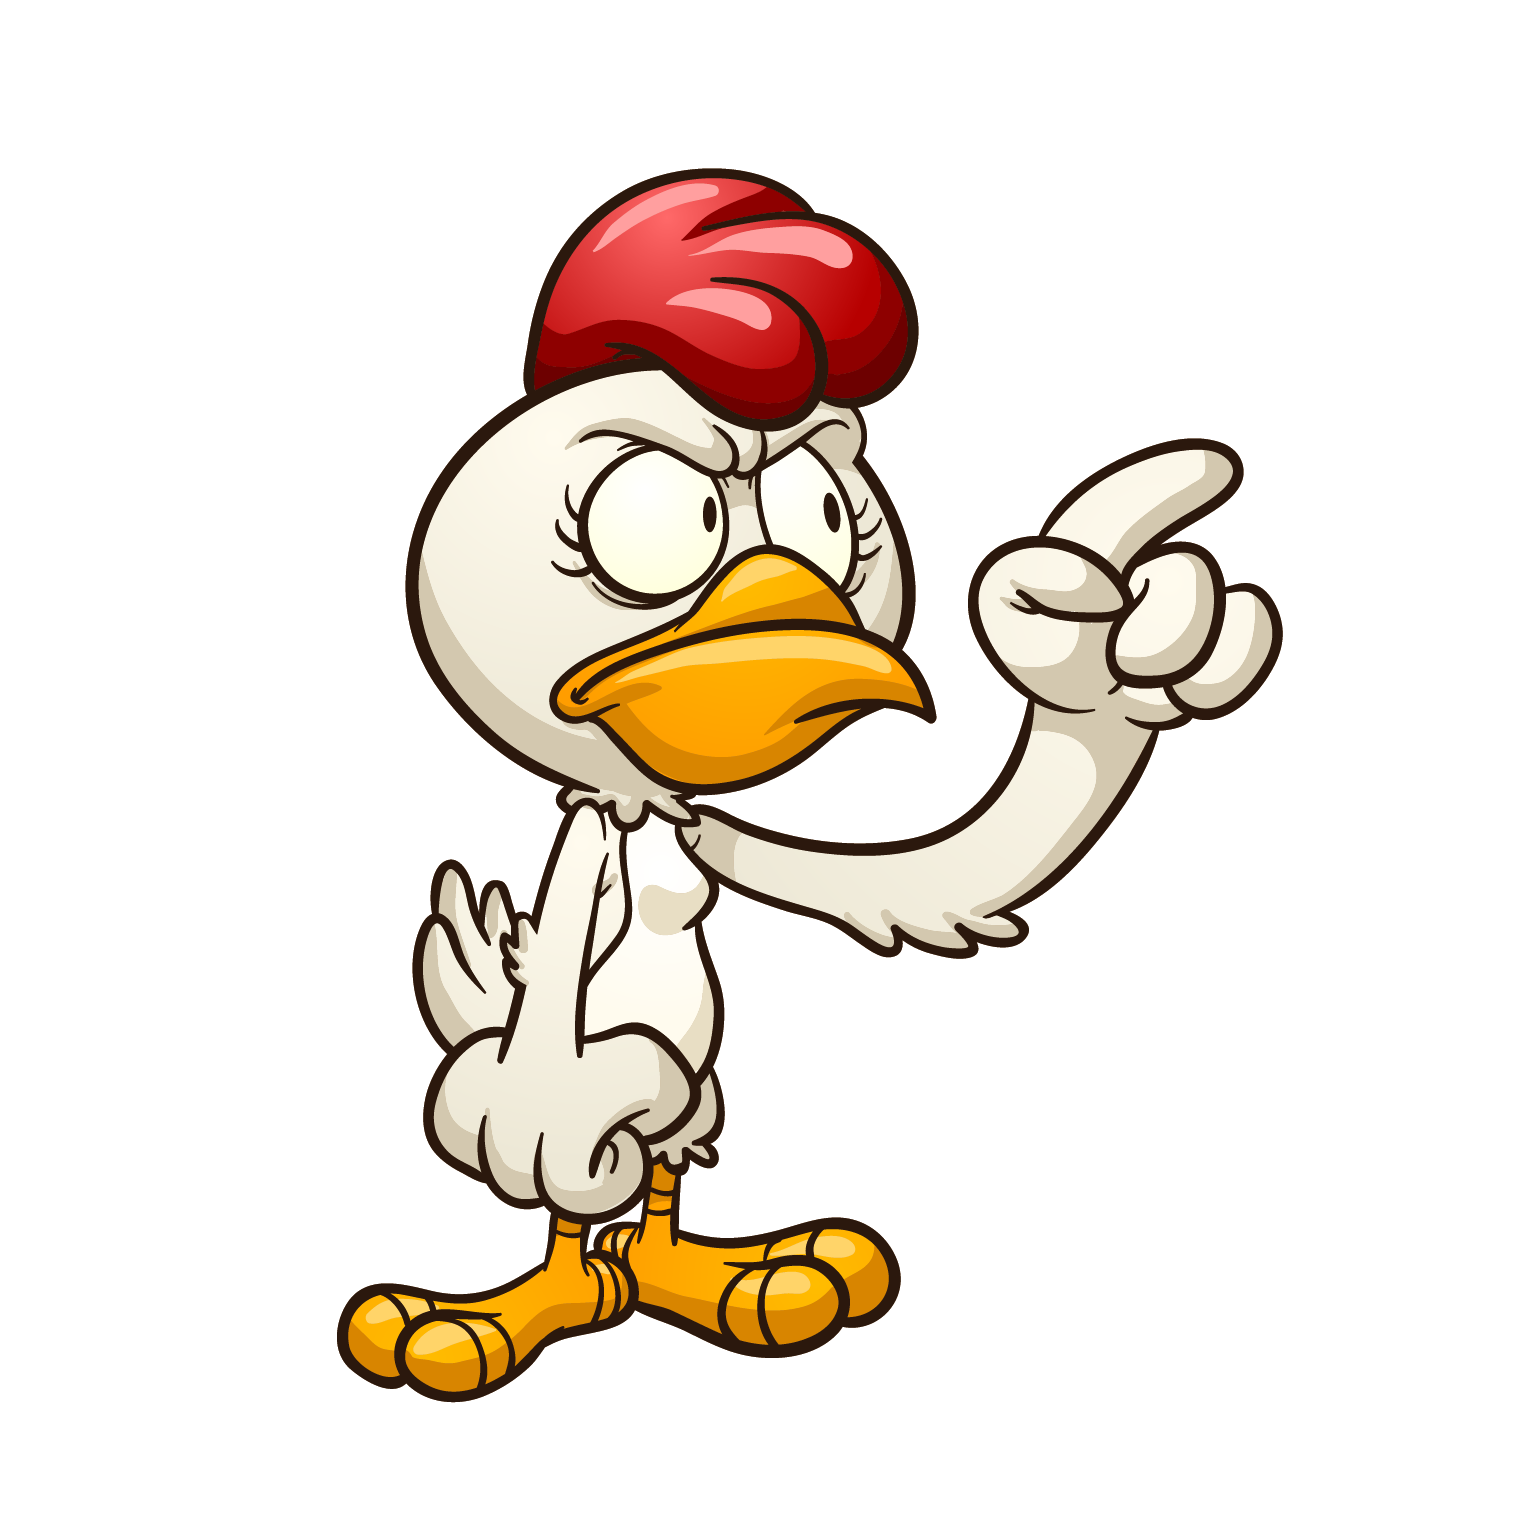 Chicken Cartoon Illustration - chick png download - 1517*1517 - Free